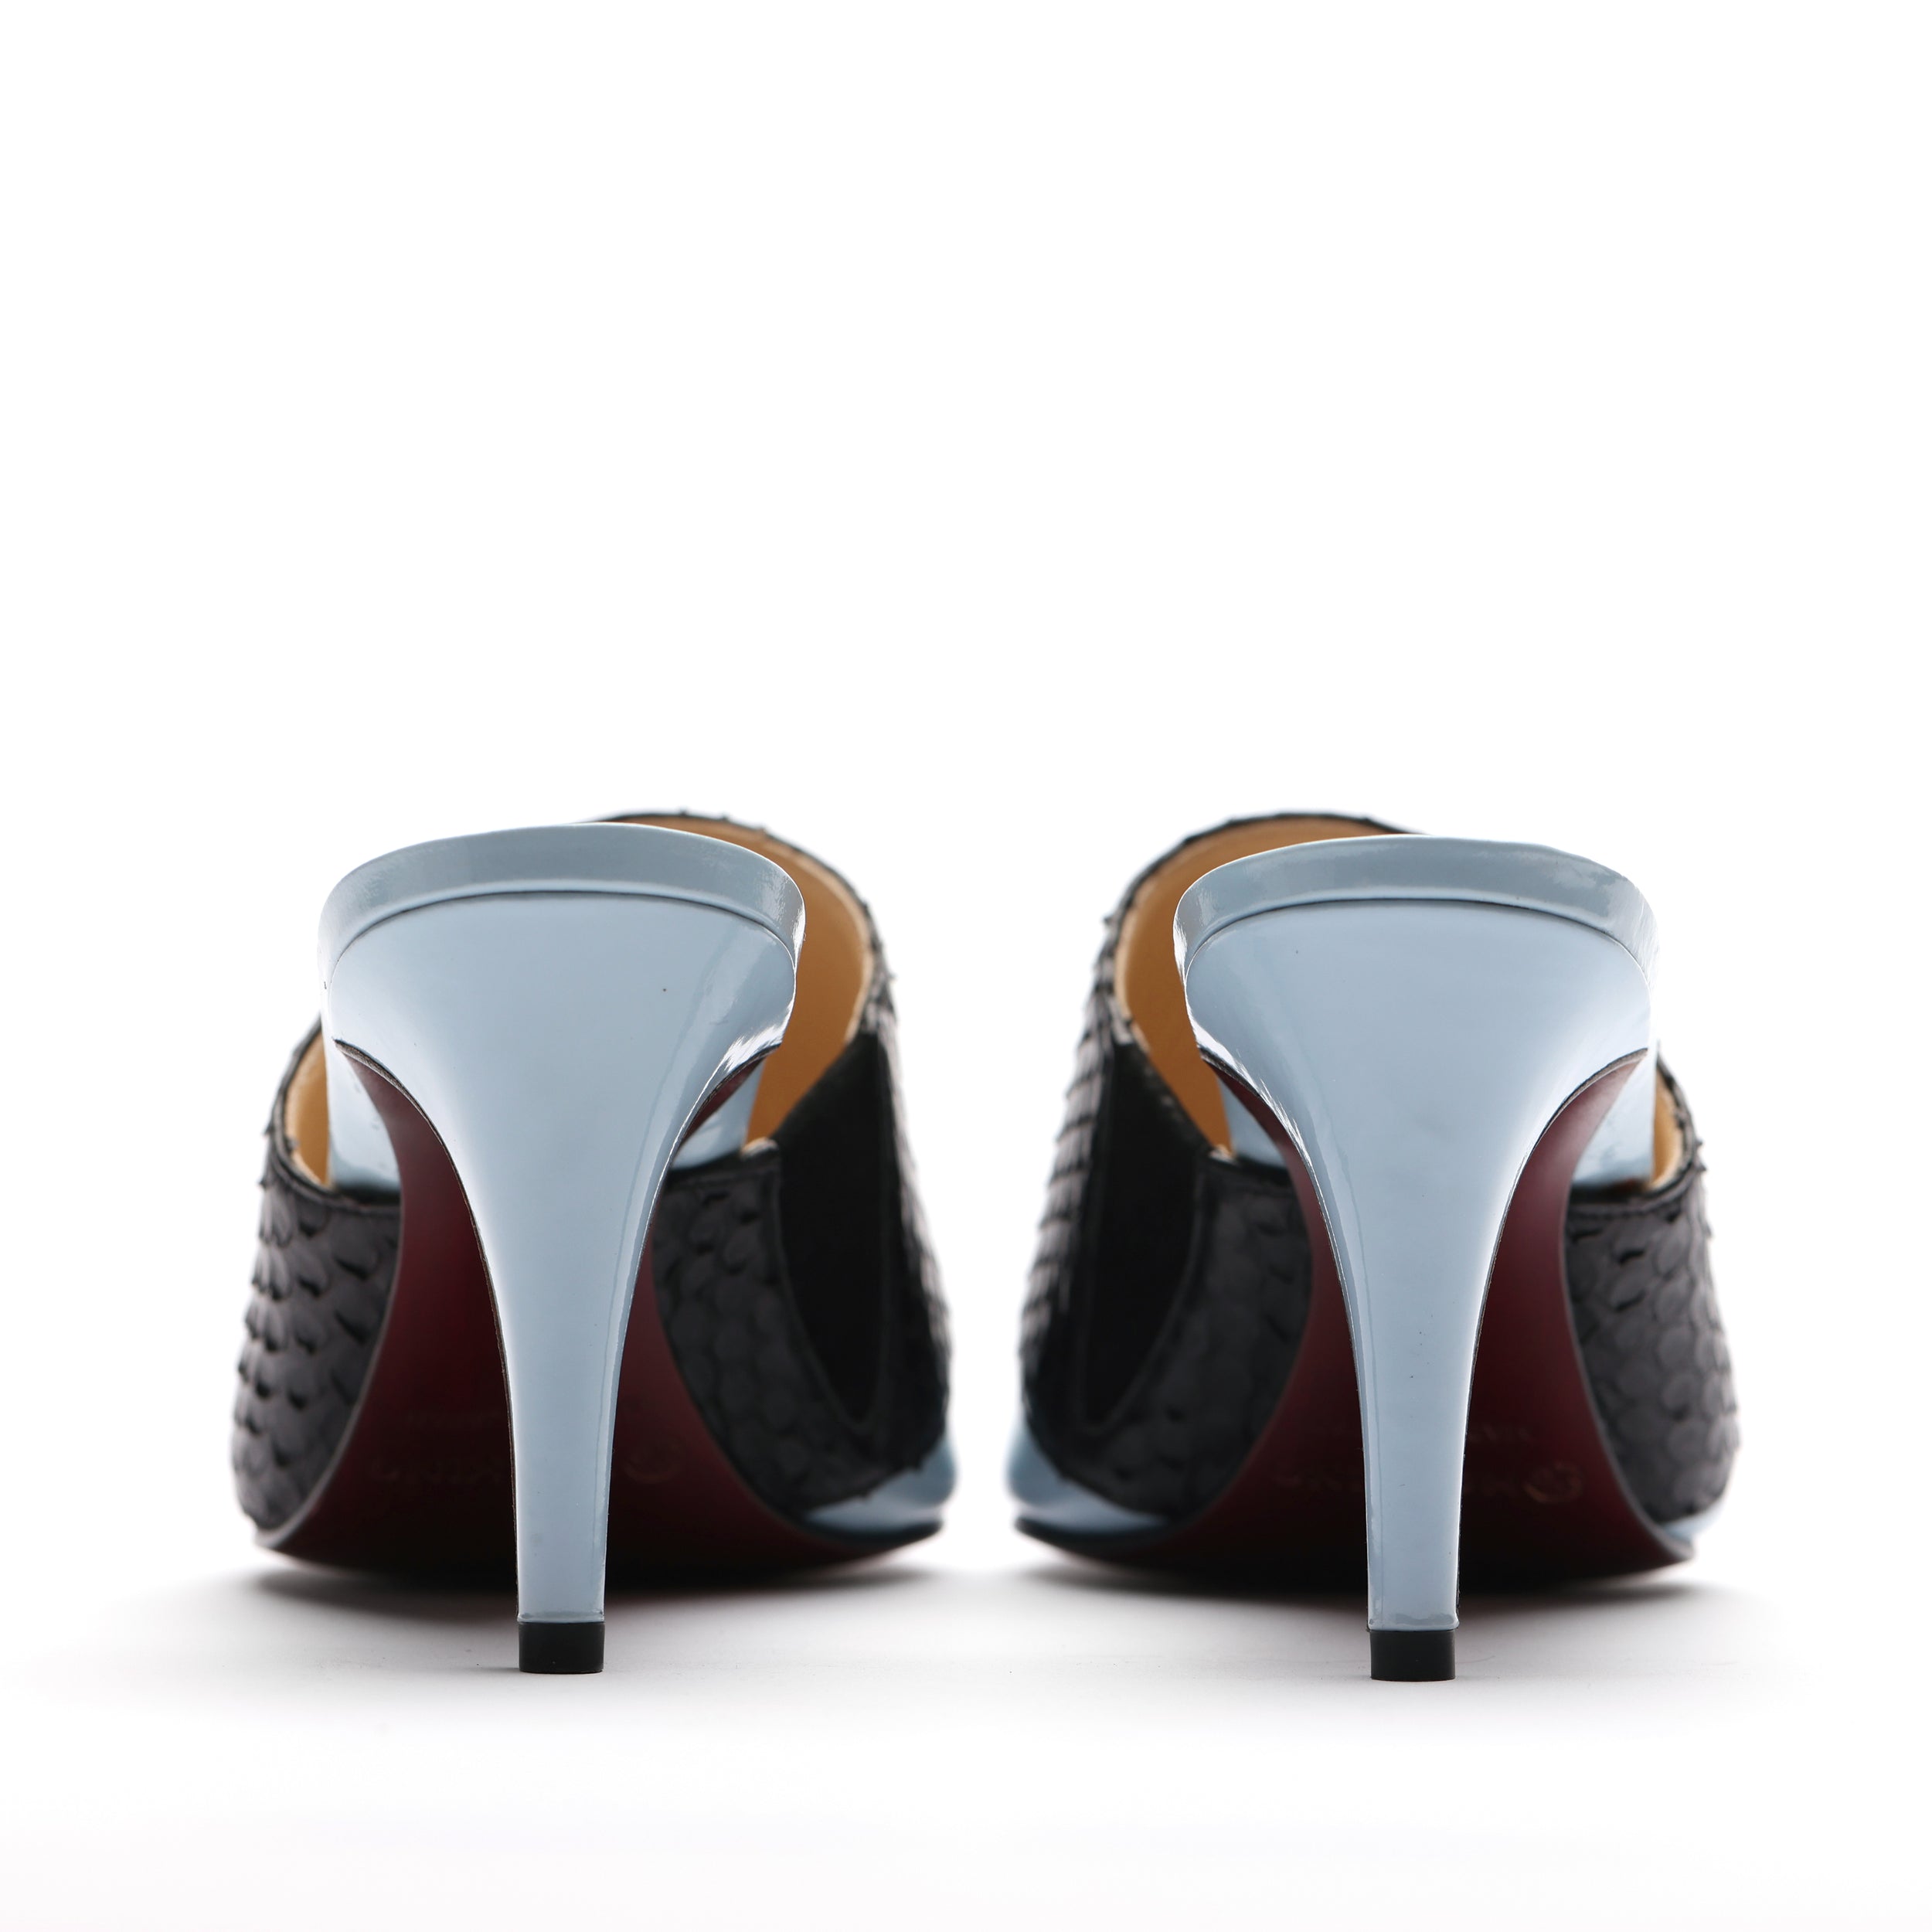 [women's] From Iris - combination mules - sky blue patent leather x black python